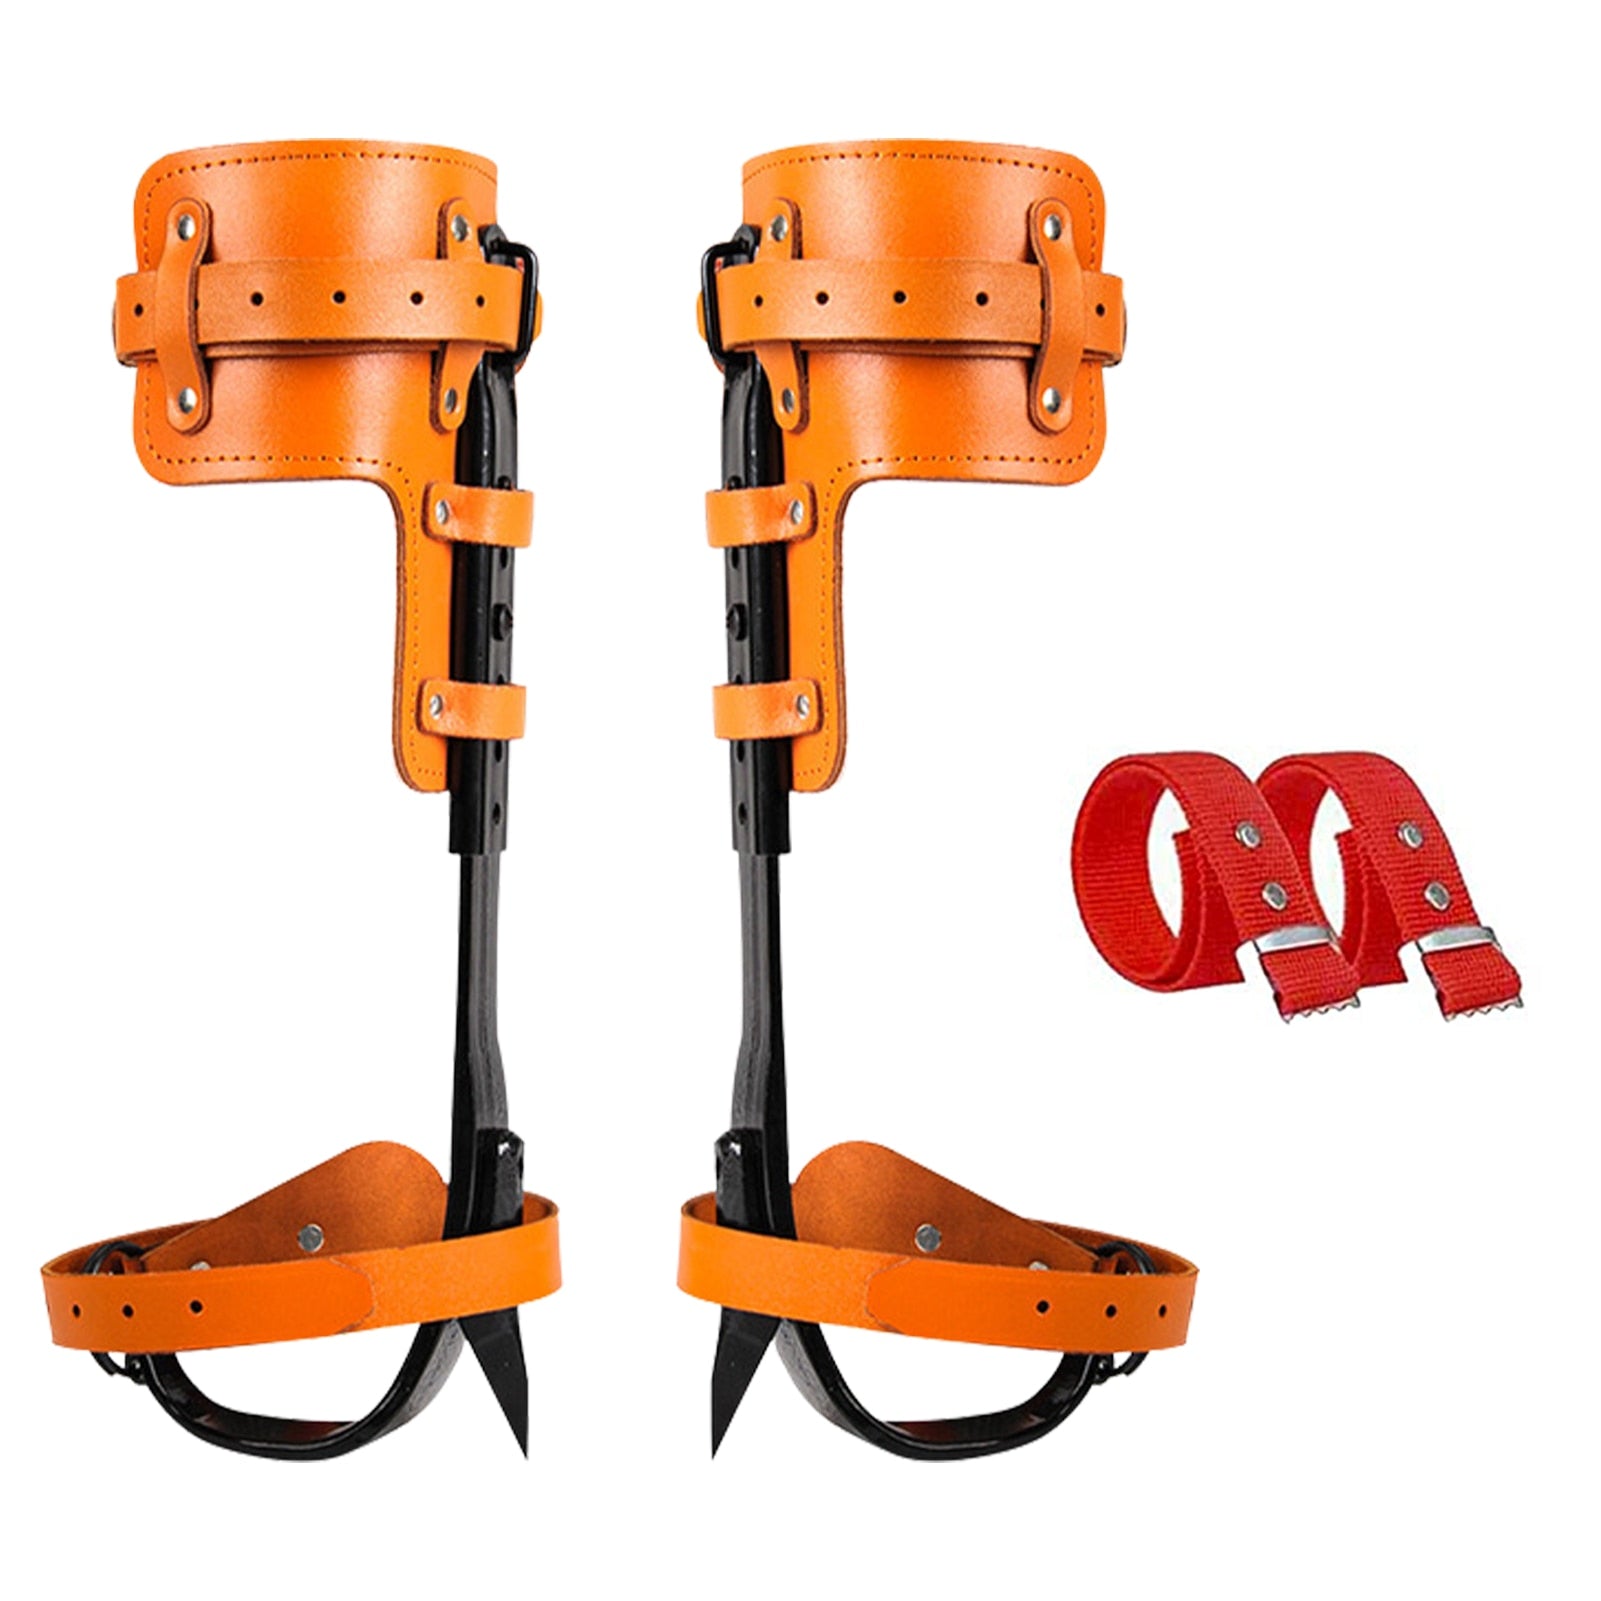 Adjusted Tree Climbing Spikes Stand-up Tree Climbing Spurs Integrated Tree Climbing Tool For Climbers Logging Hunting